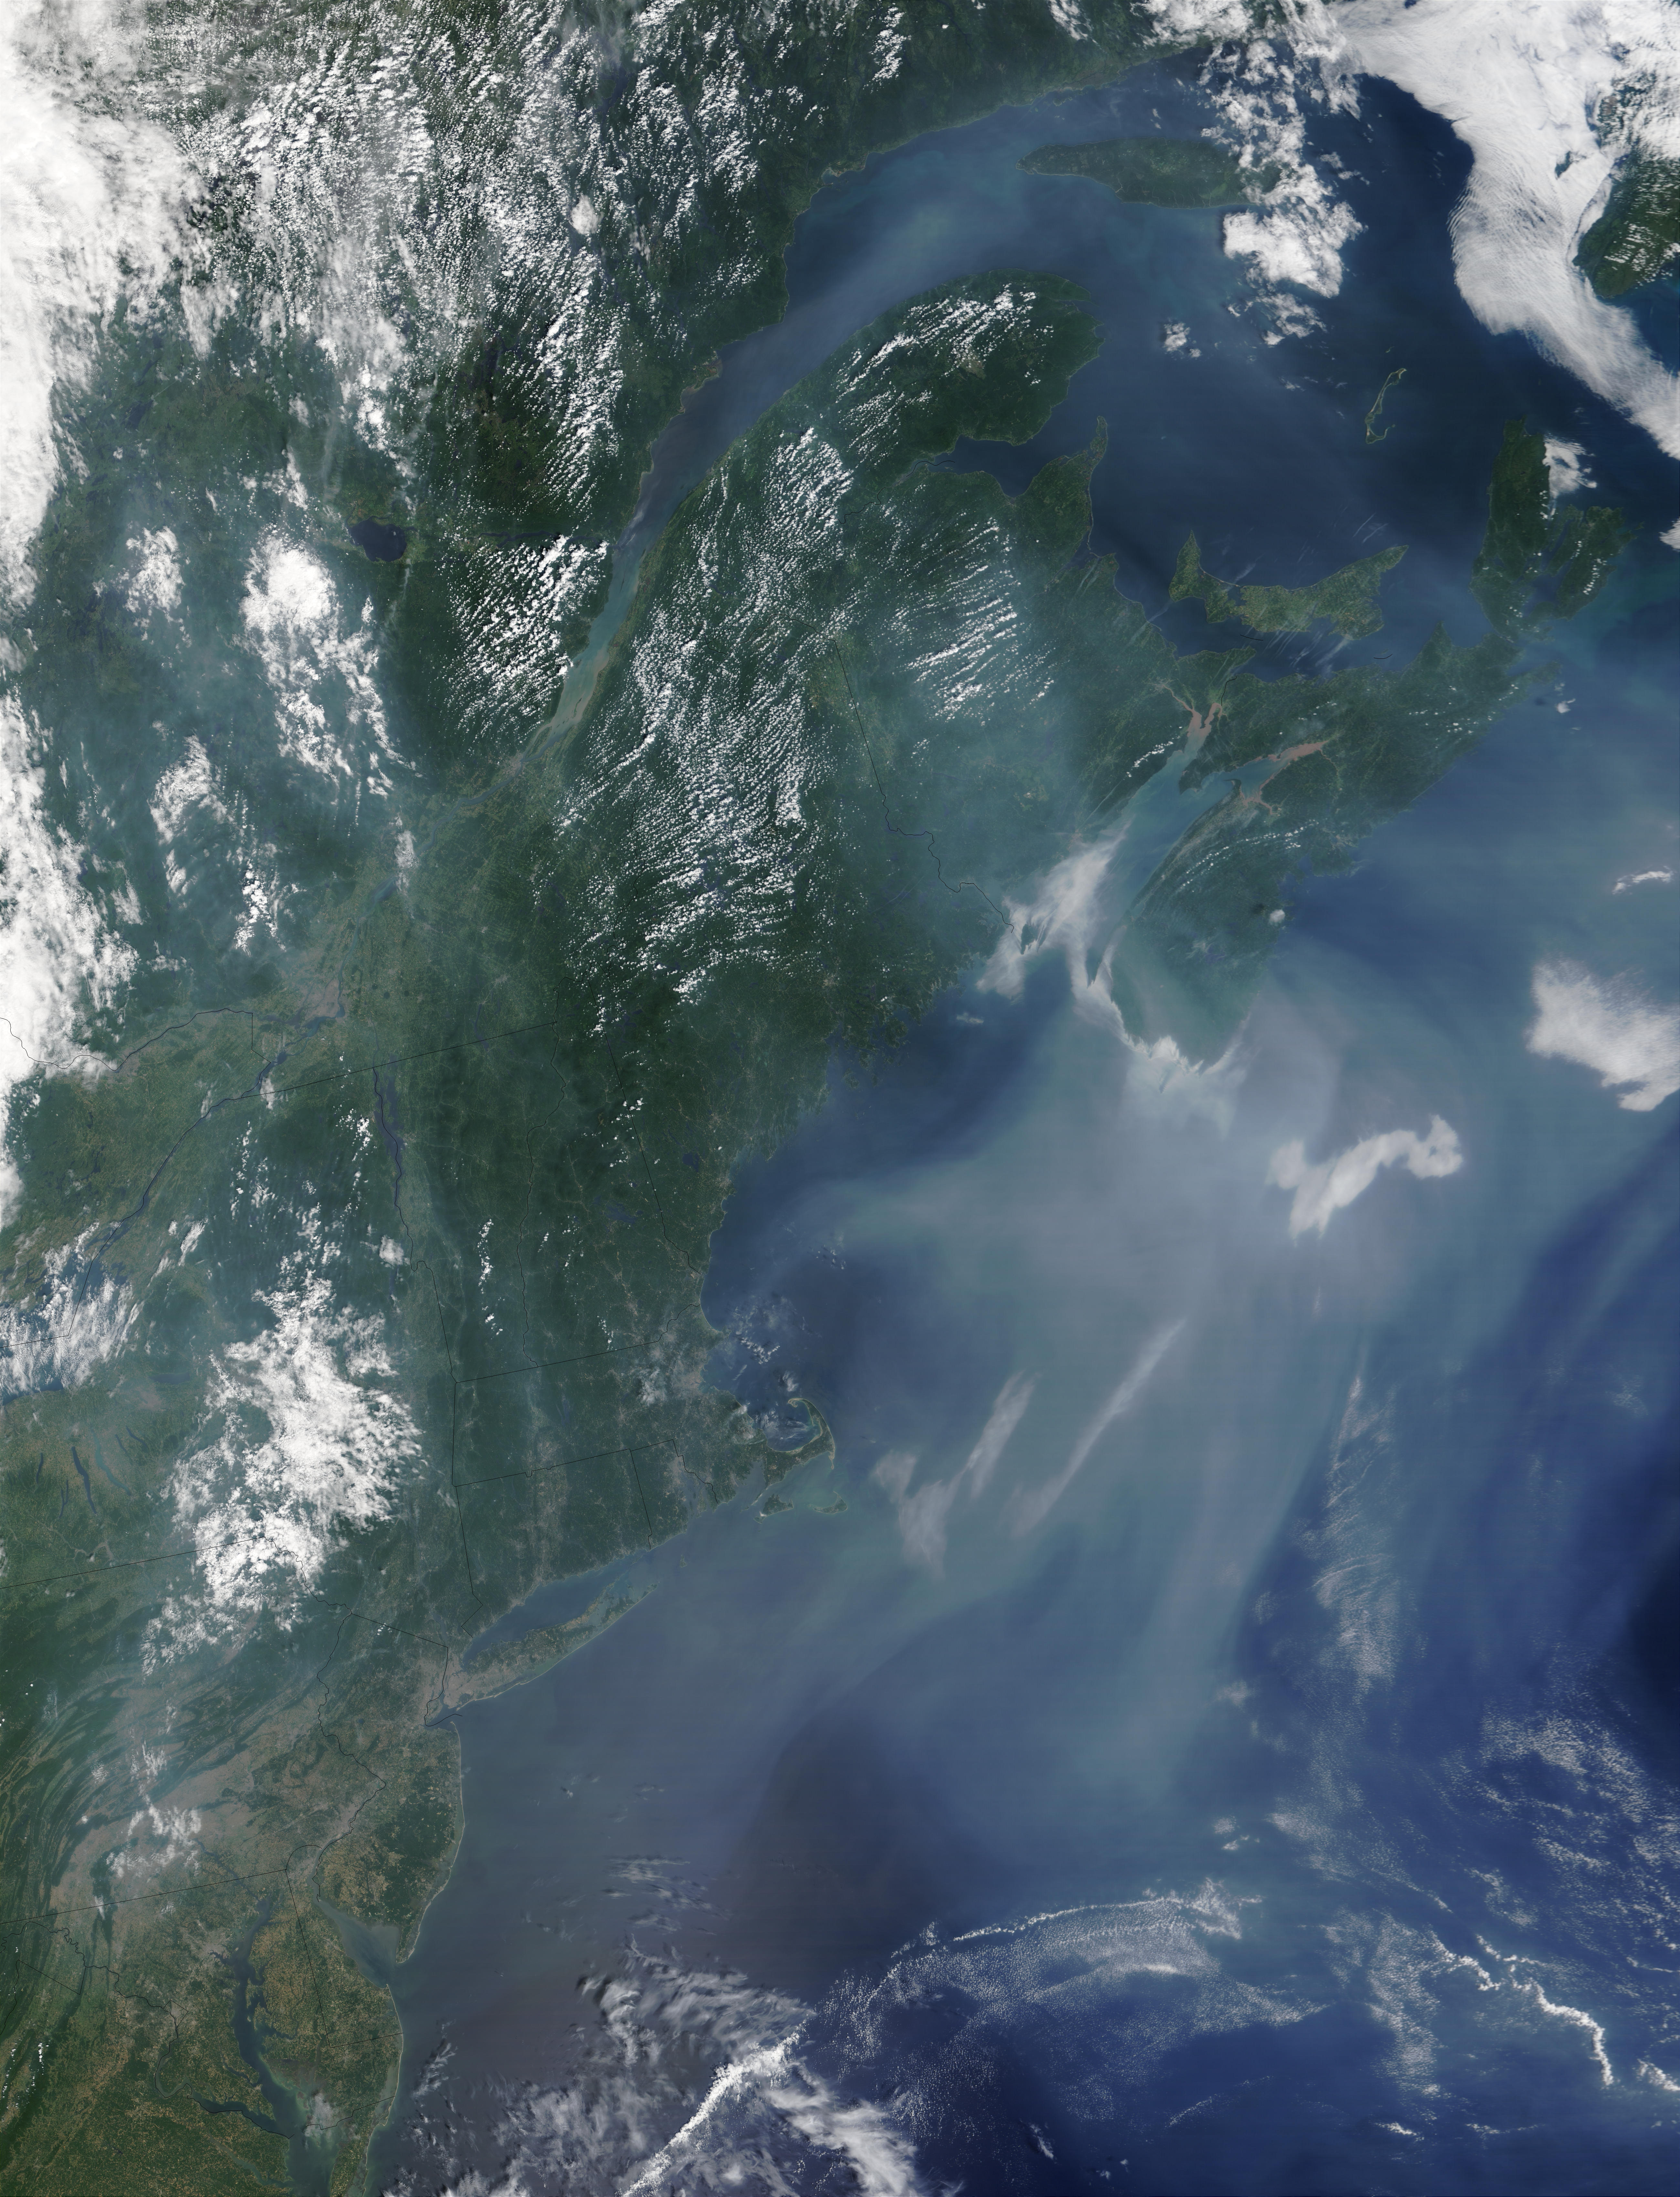 Pollution off United States East Coast - related image preview